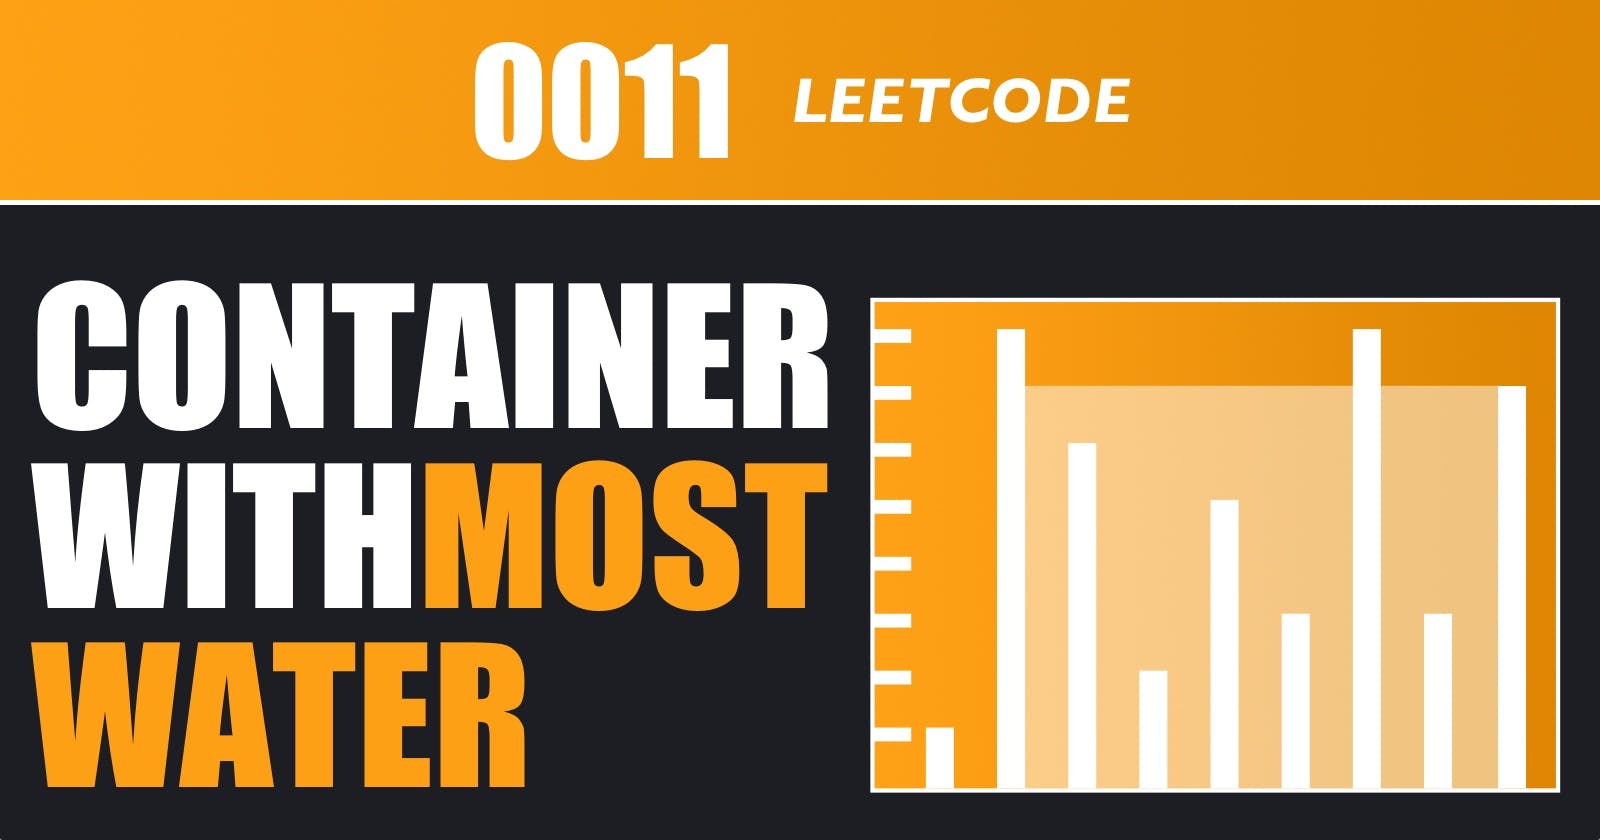 Container With Most Water - Leetcode 11